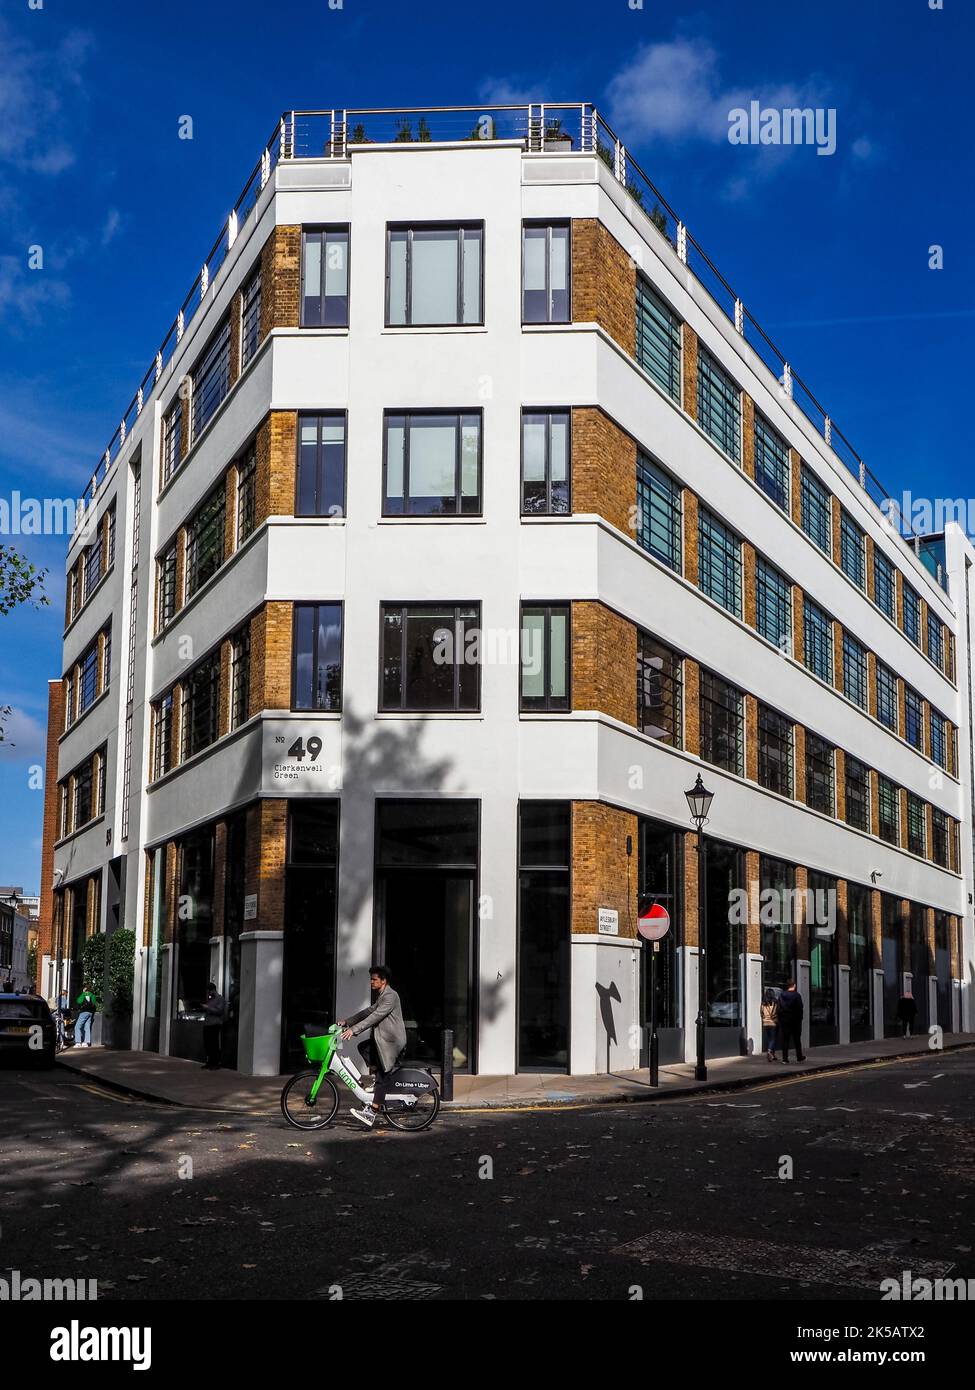 The Buckley Building Clerkenwell London. Redevelopment of a former 1930s warehouse building into modern office space. Architects Buckley Gray Yeoman. Stock Photo